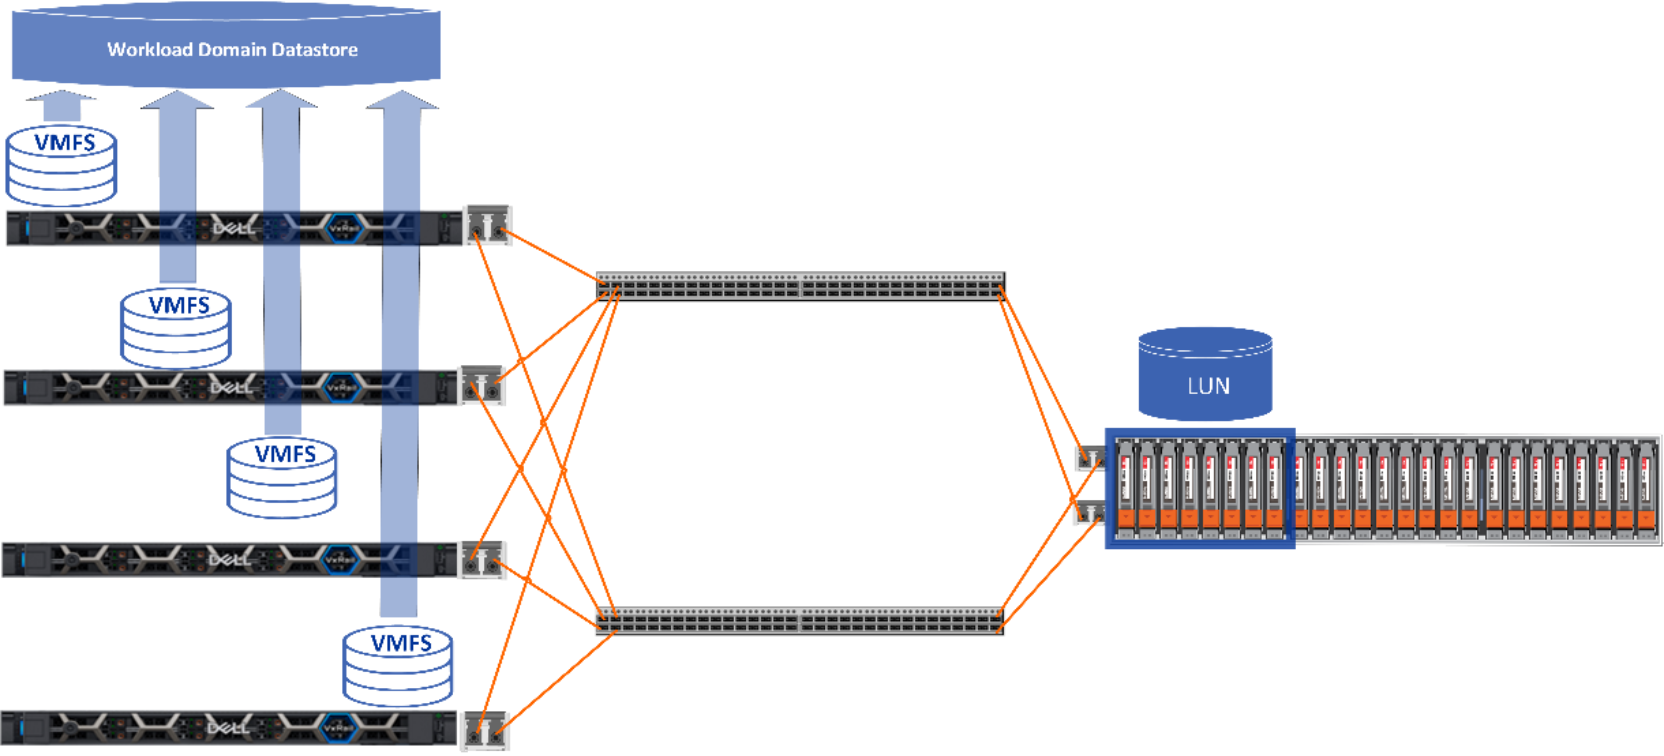 This figure shows a Fibre Channel network that provides storage resources for a VI workload domain. 